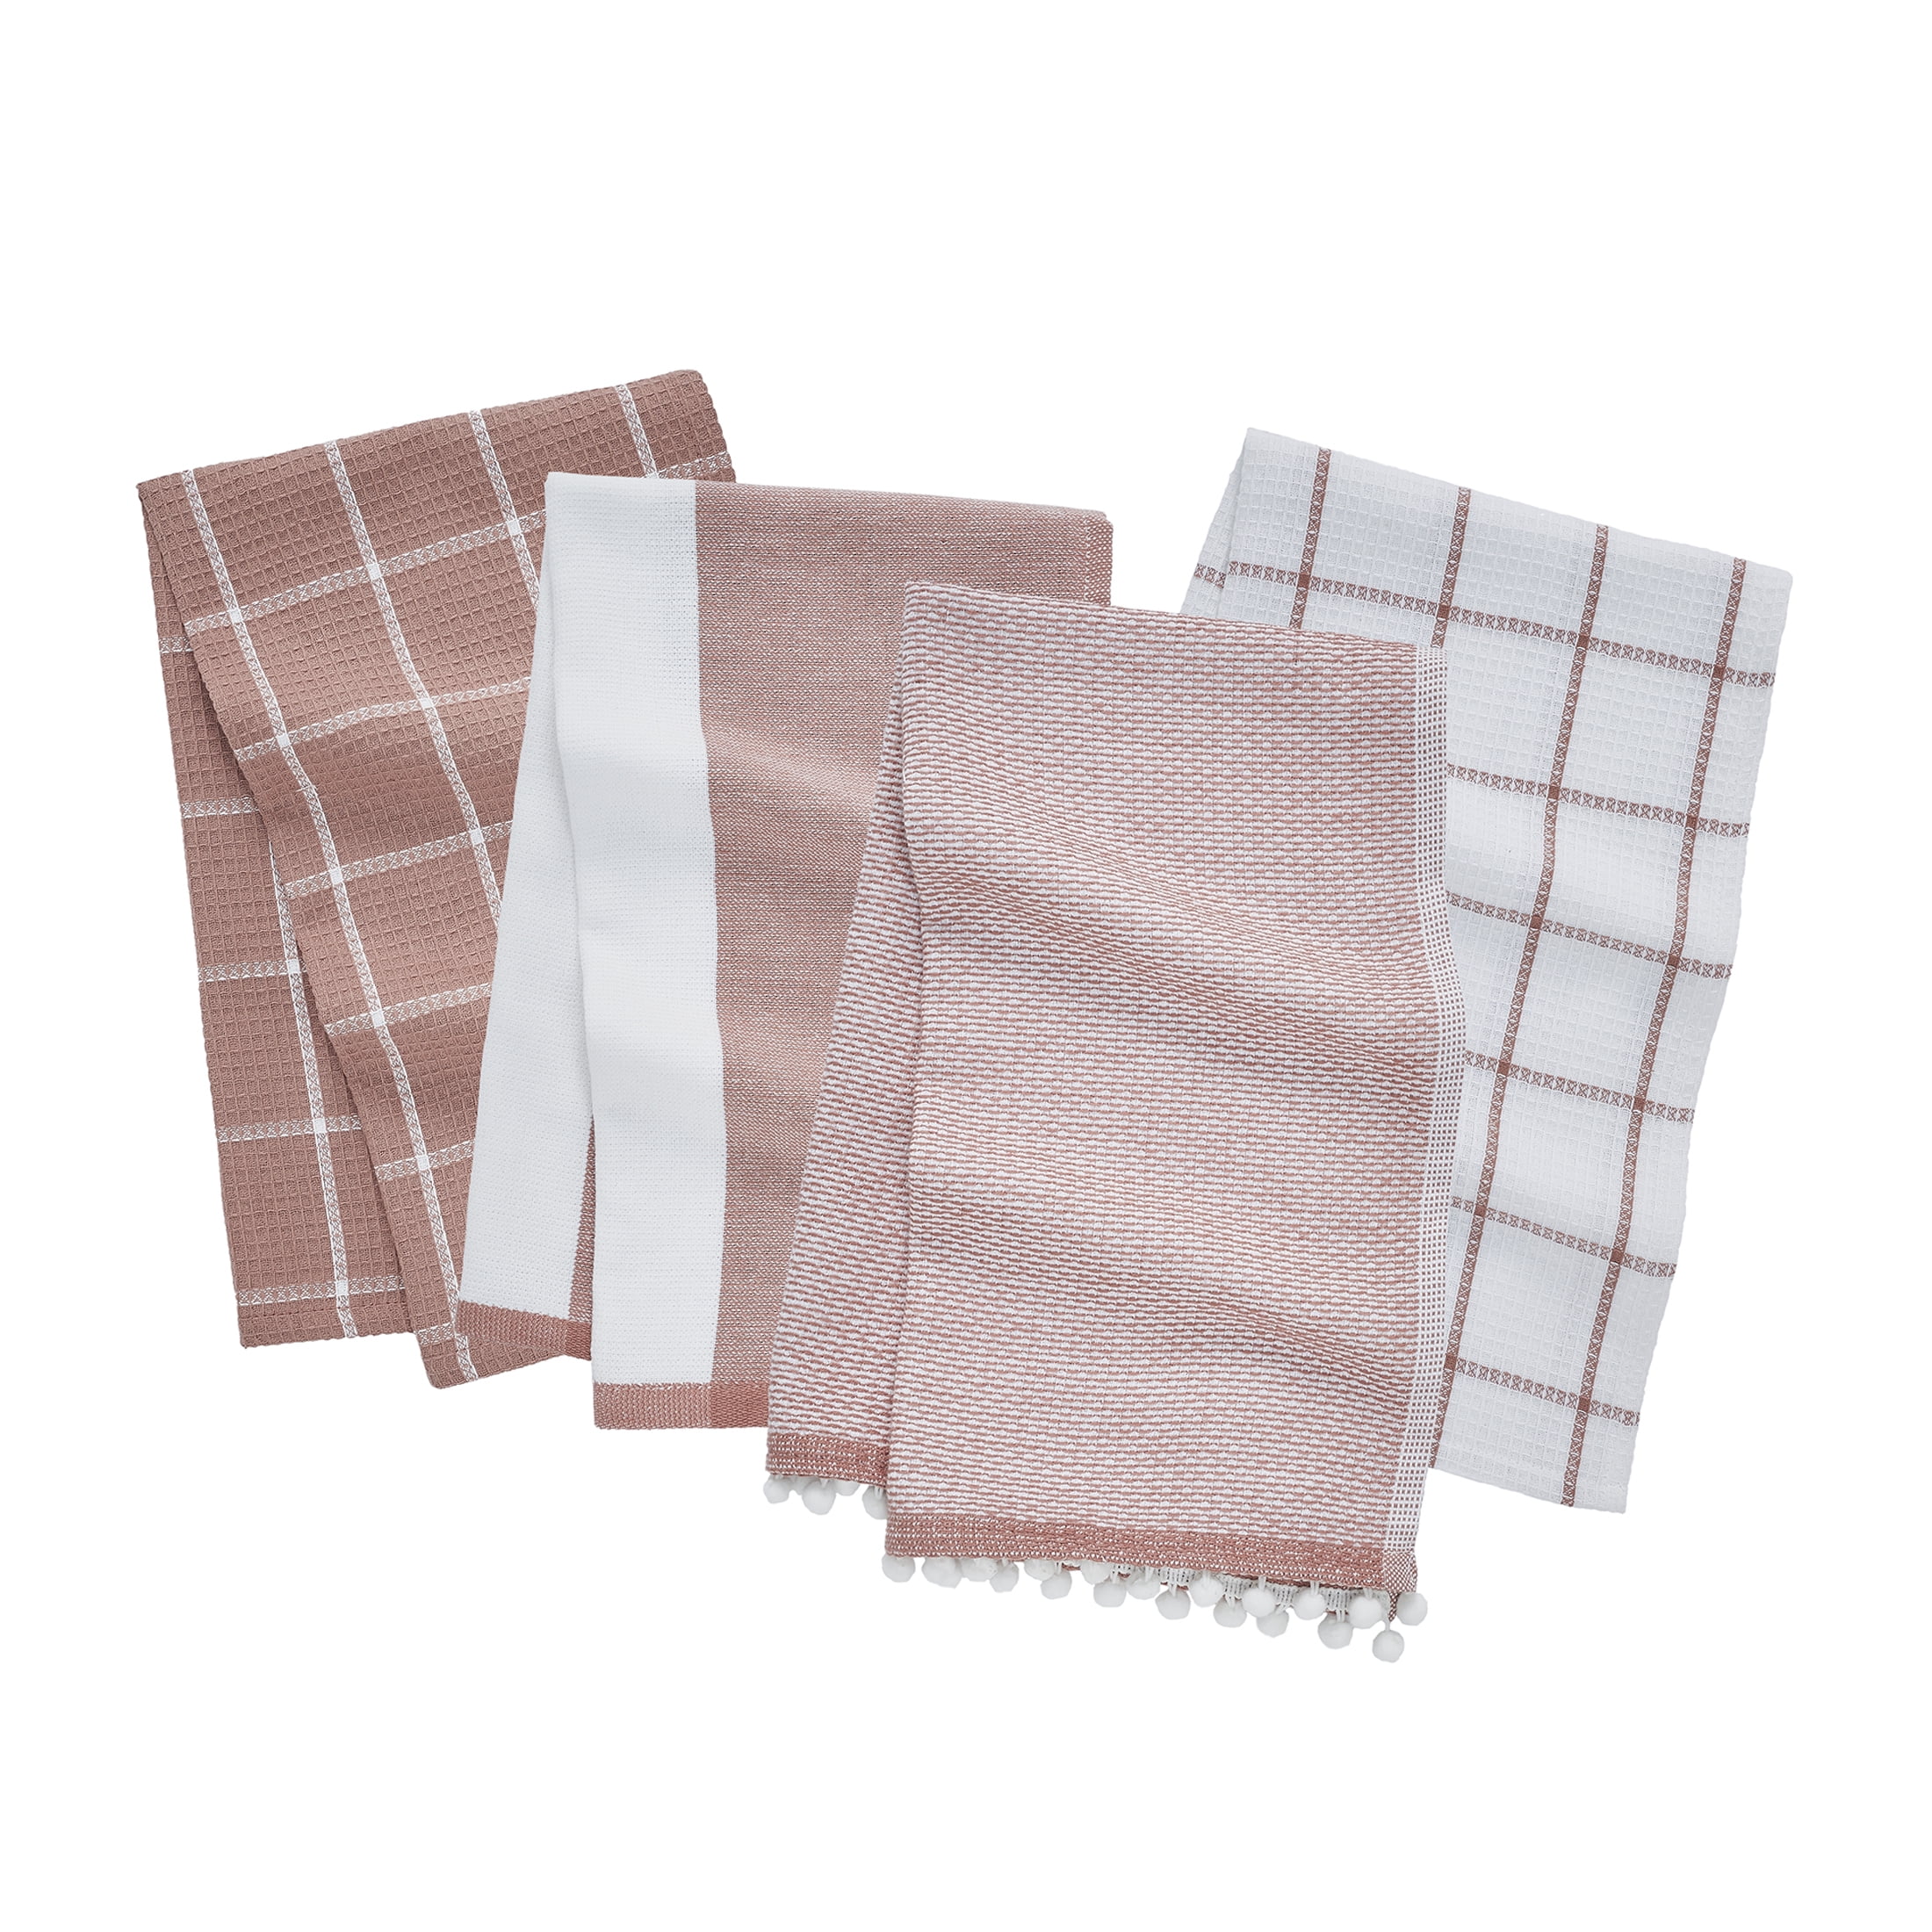 My Texas House Grid Cotton Kitchen Towels - Pink - 16 x 28 in